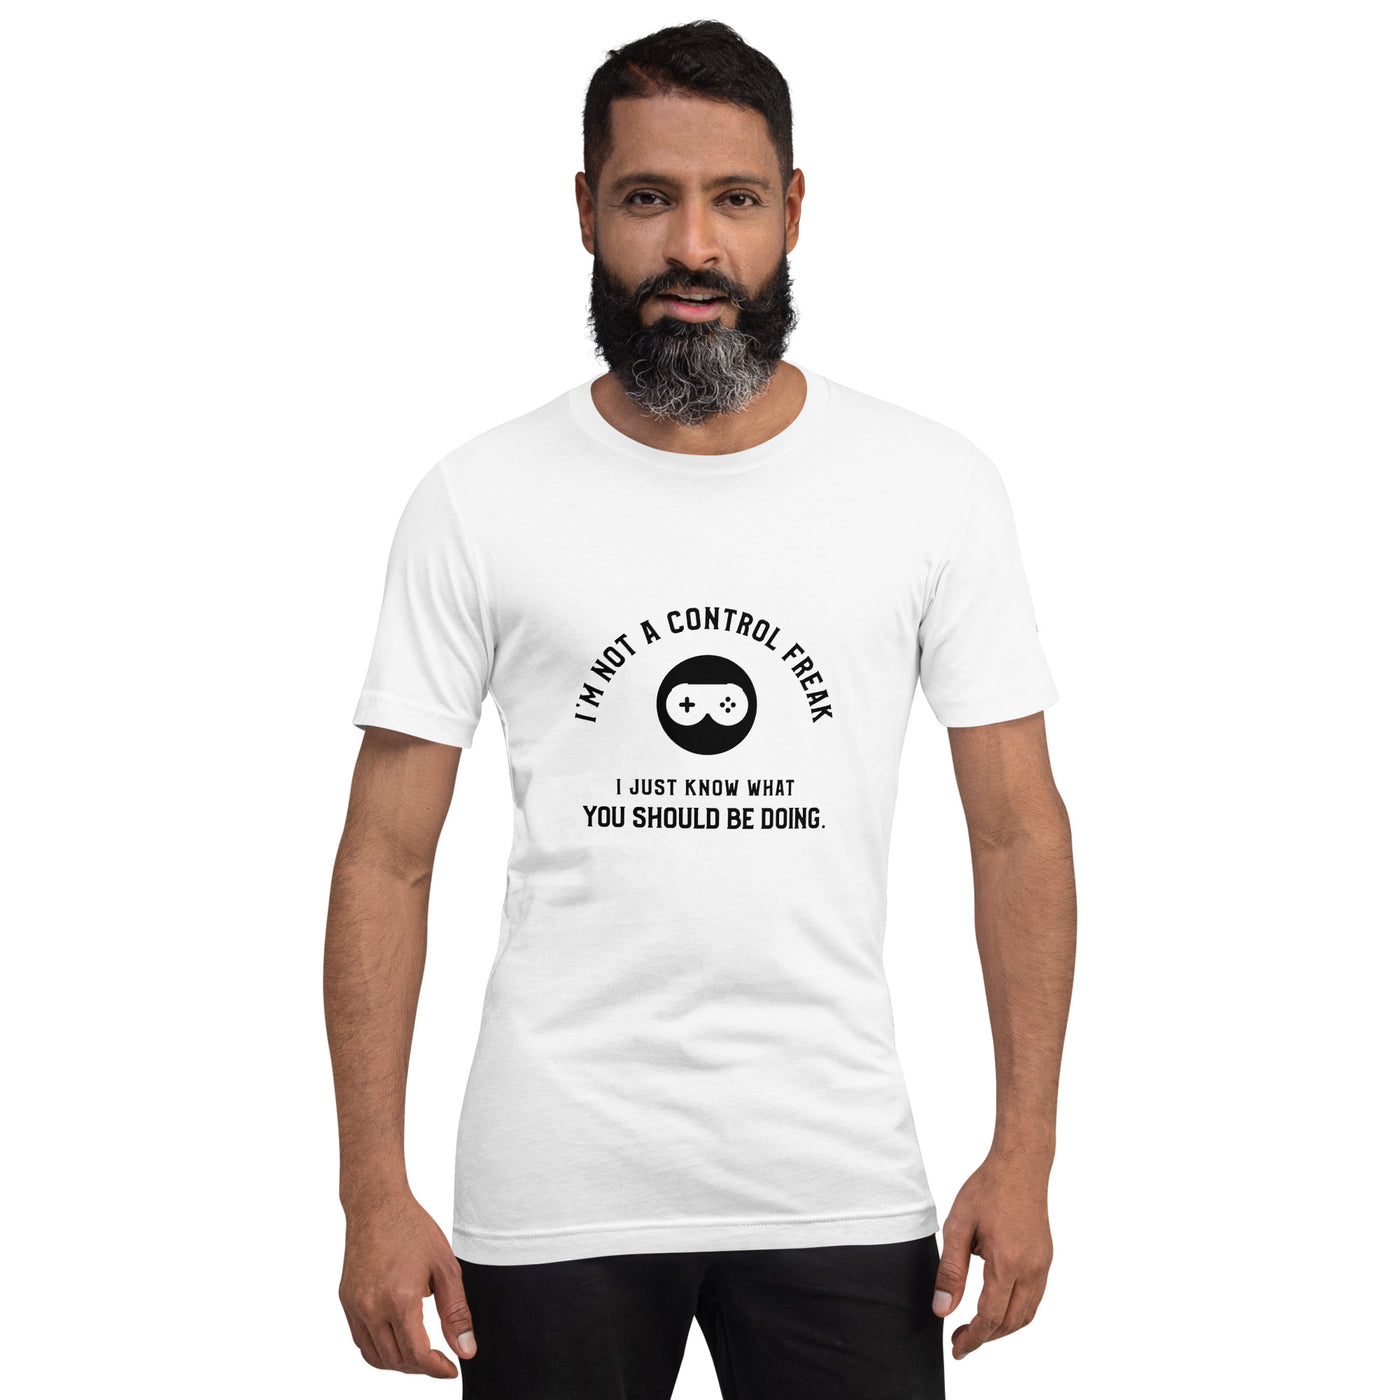 I am not a Control freak, I just Know what you should be doing - Unisex t-shirt